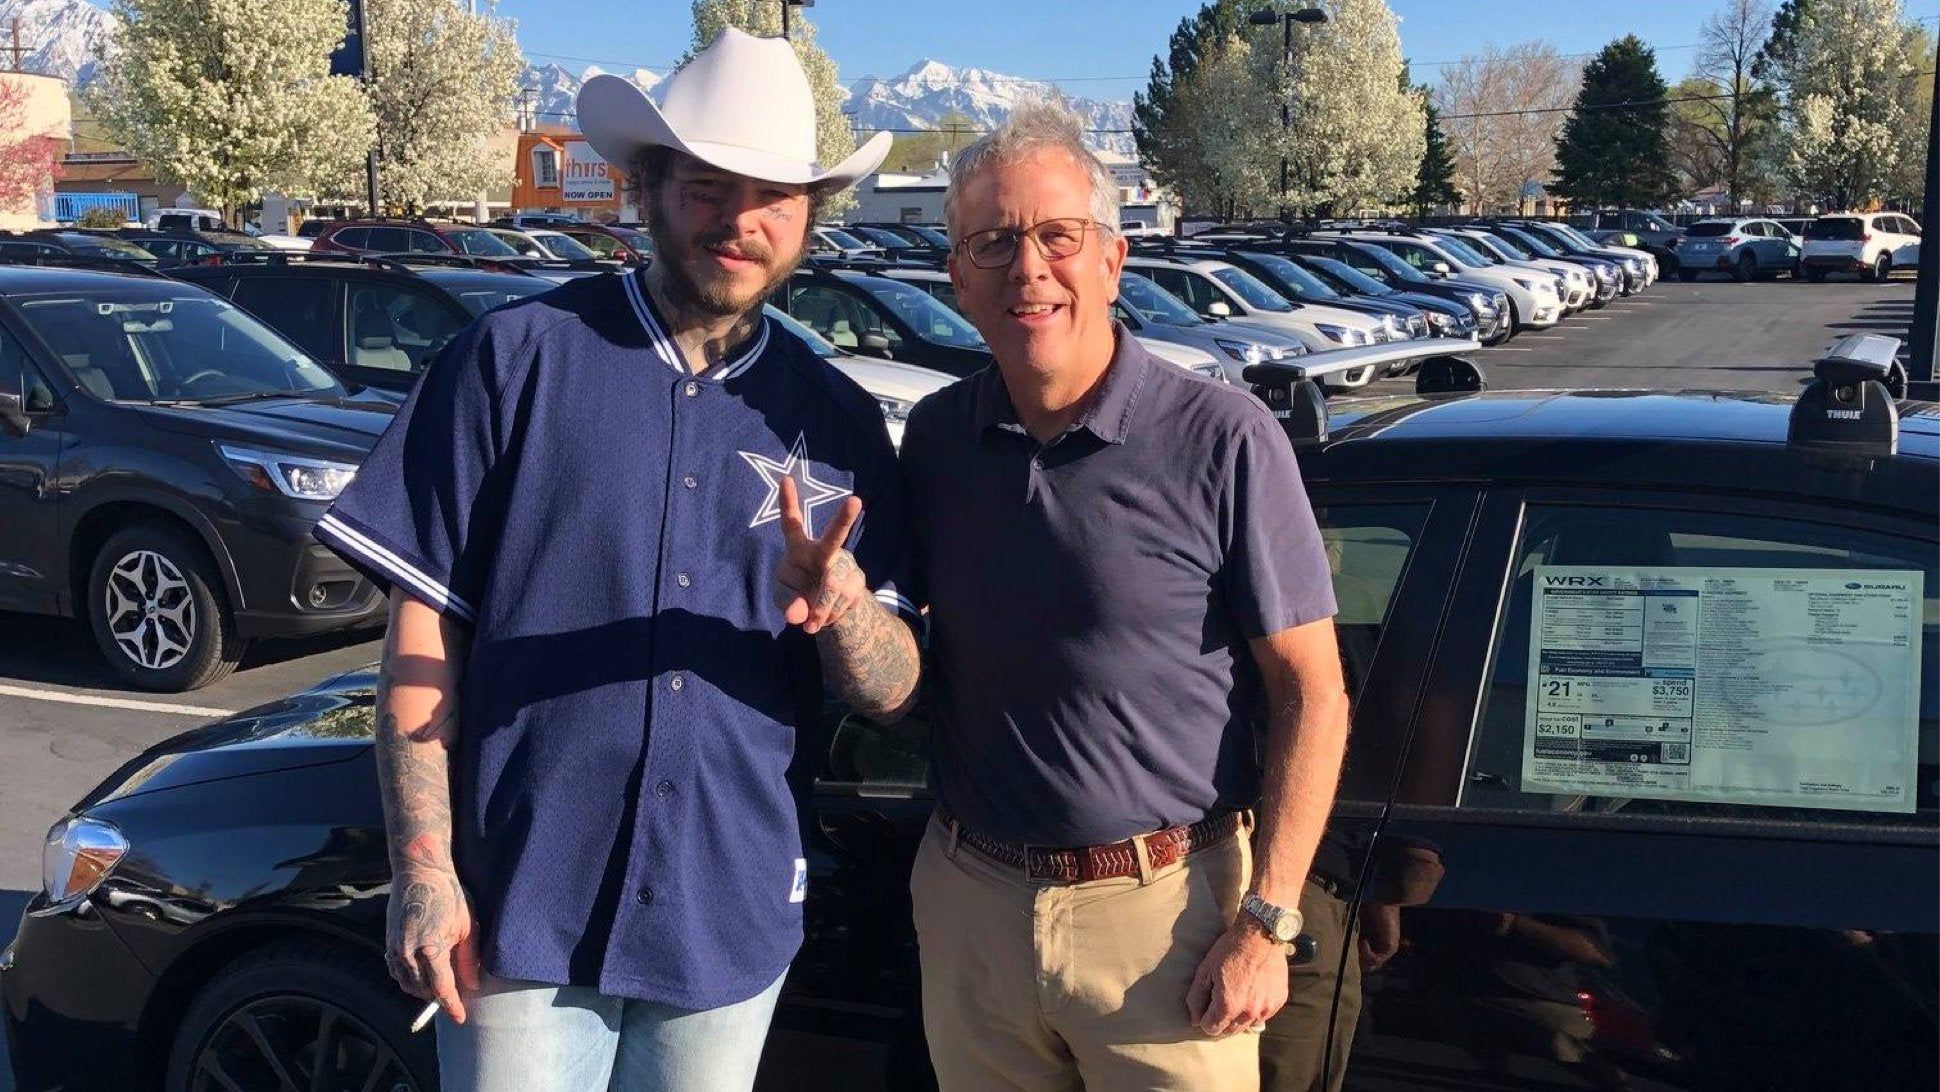 Post Malone poses with a fan in front of a 2019 Subaru WRX